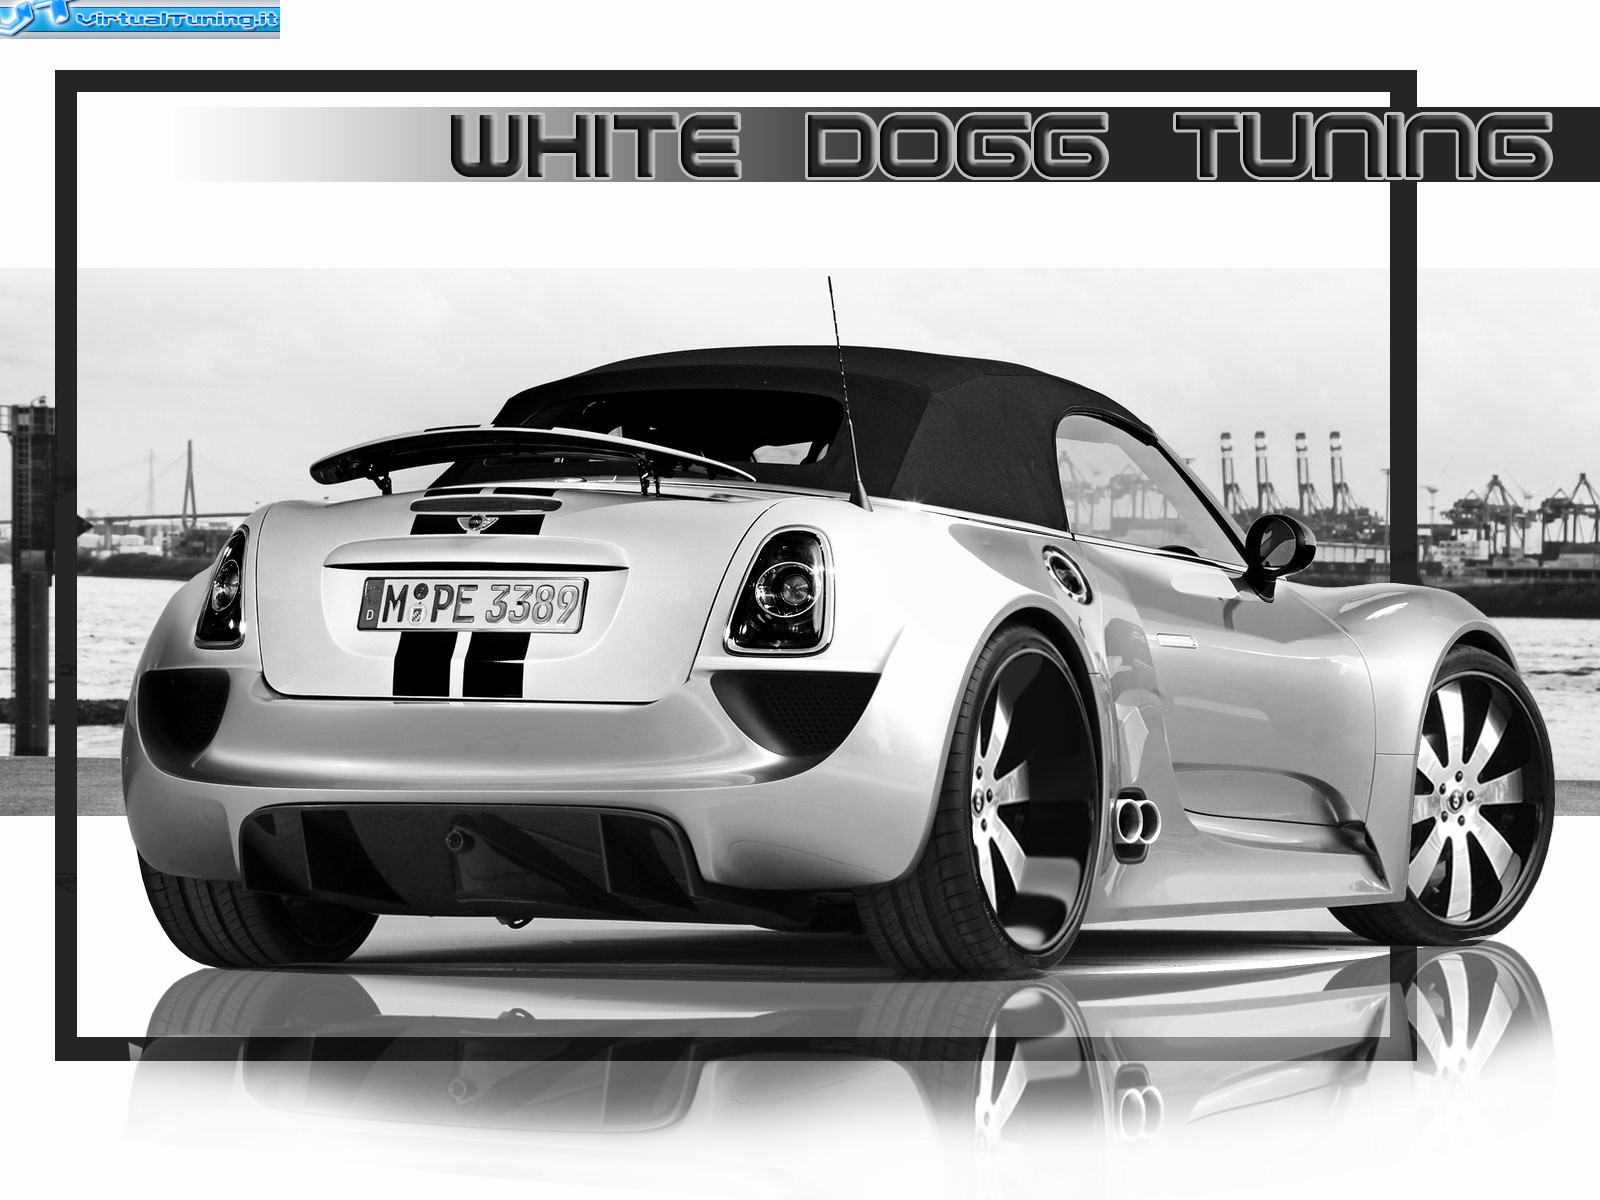 VirtualTuning MINI Roadster by WhiteDoggTuning